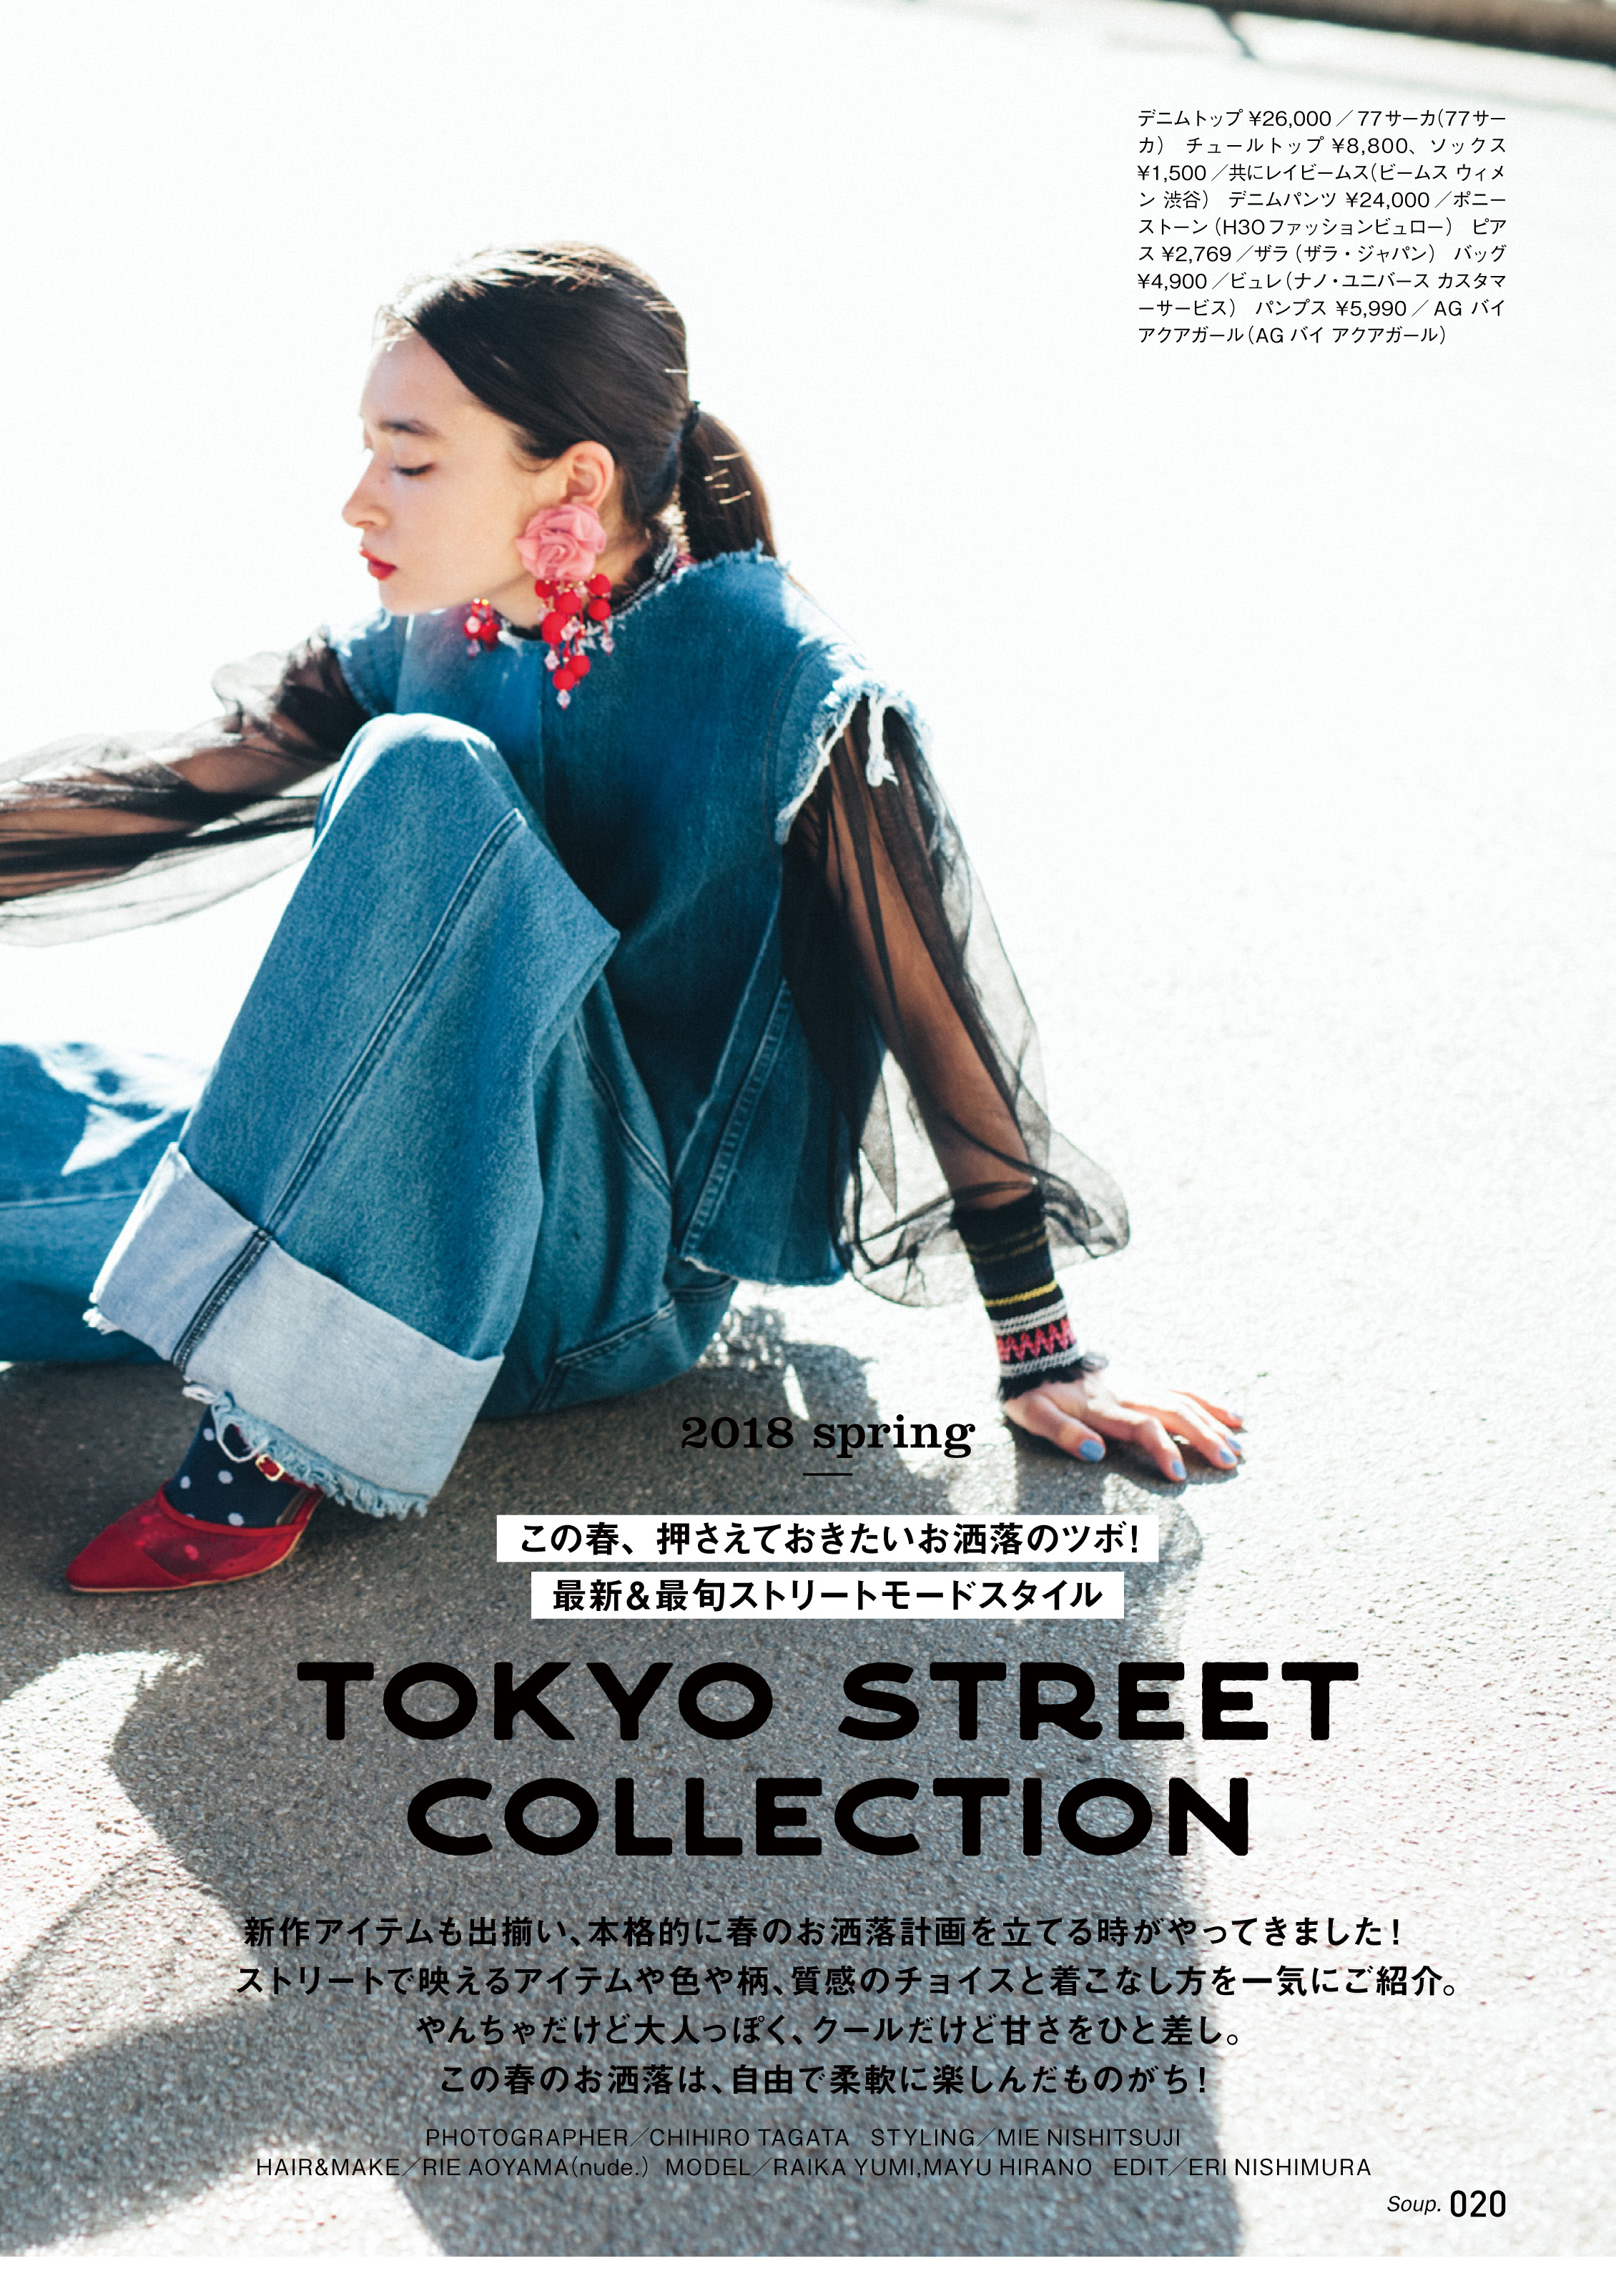 TOKYO STREET COLLECTION